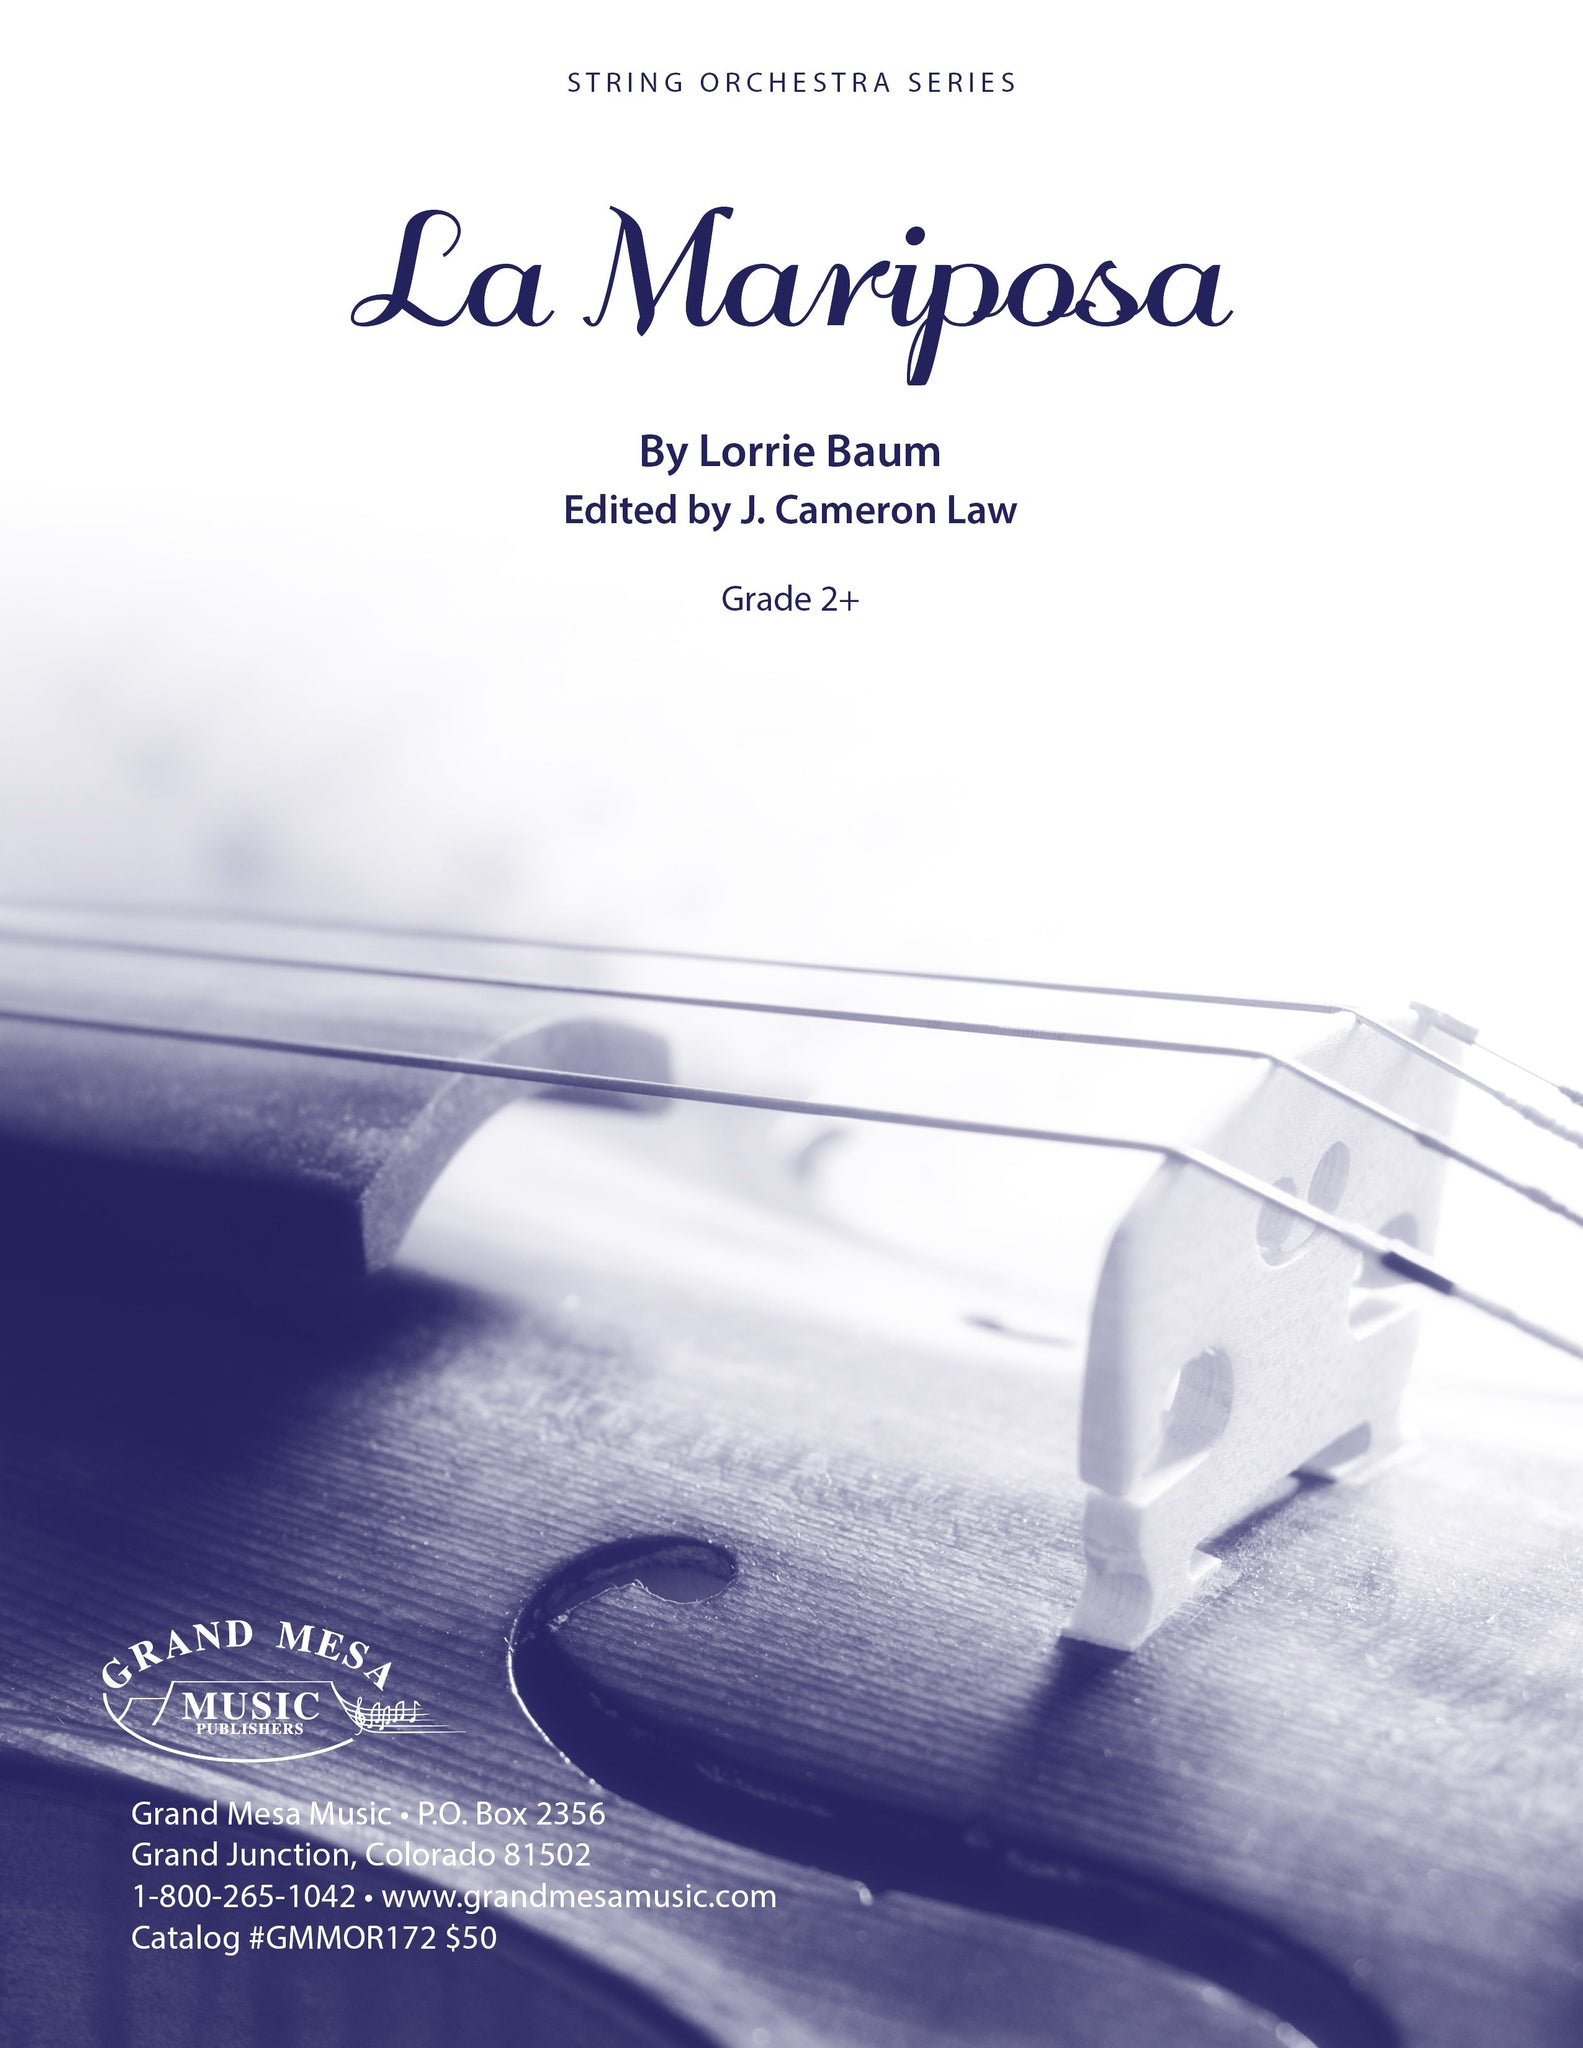 Strings sheet music cover of La Mariposa, composed by Lorrie Baum.